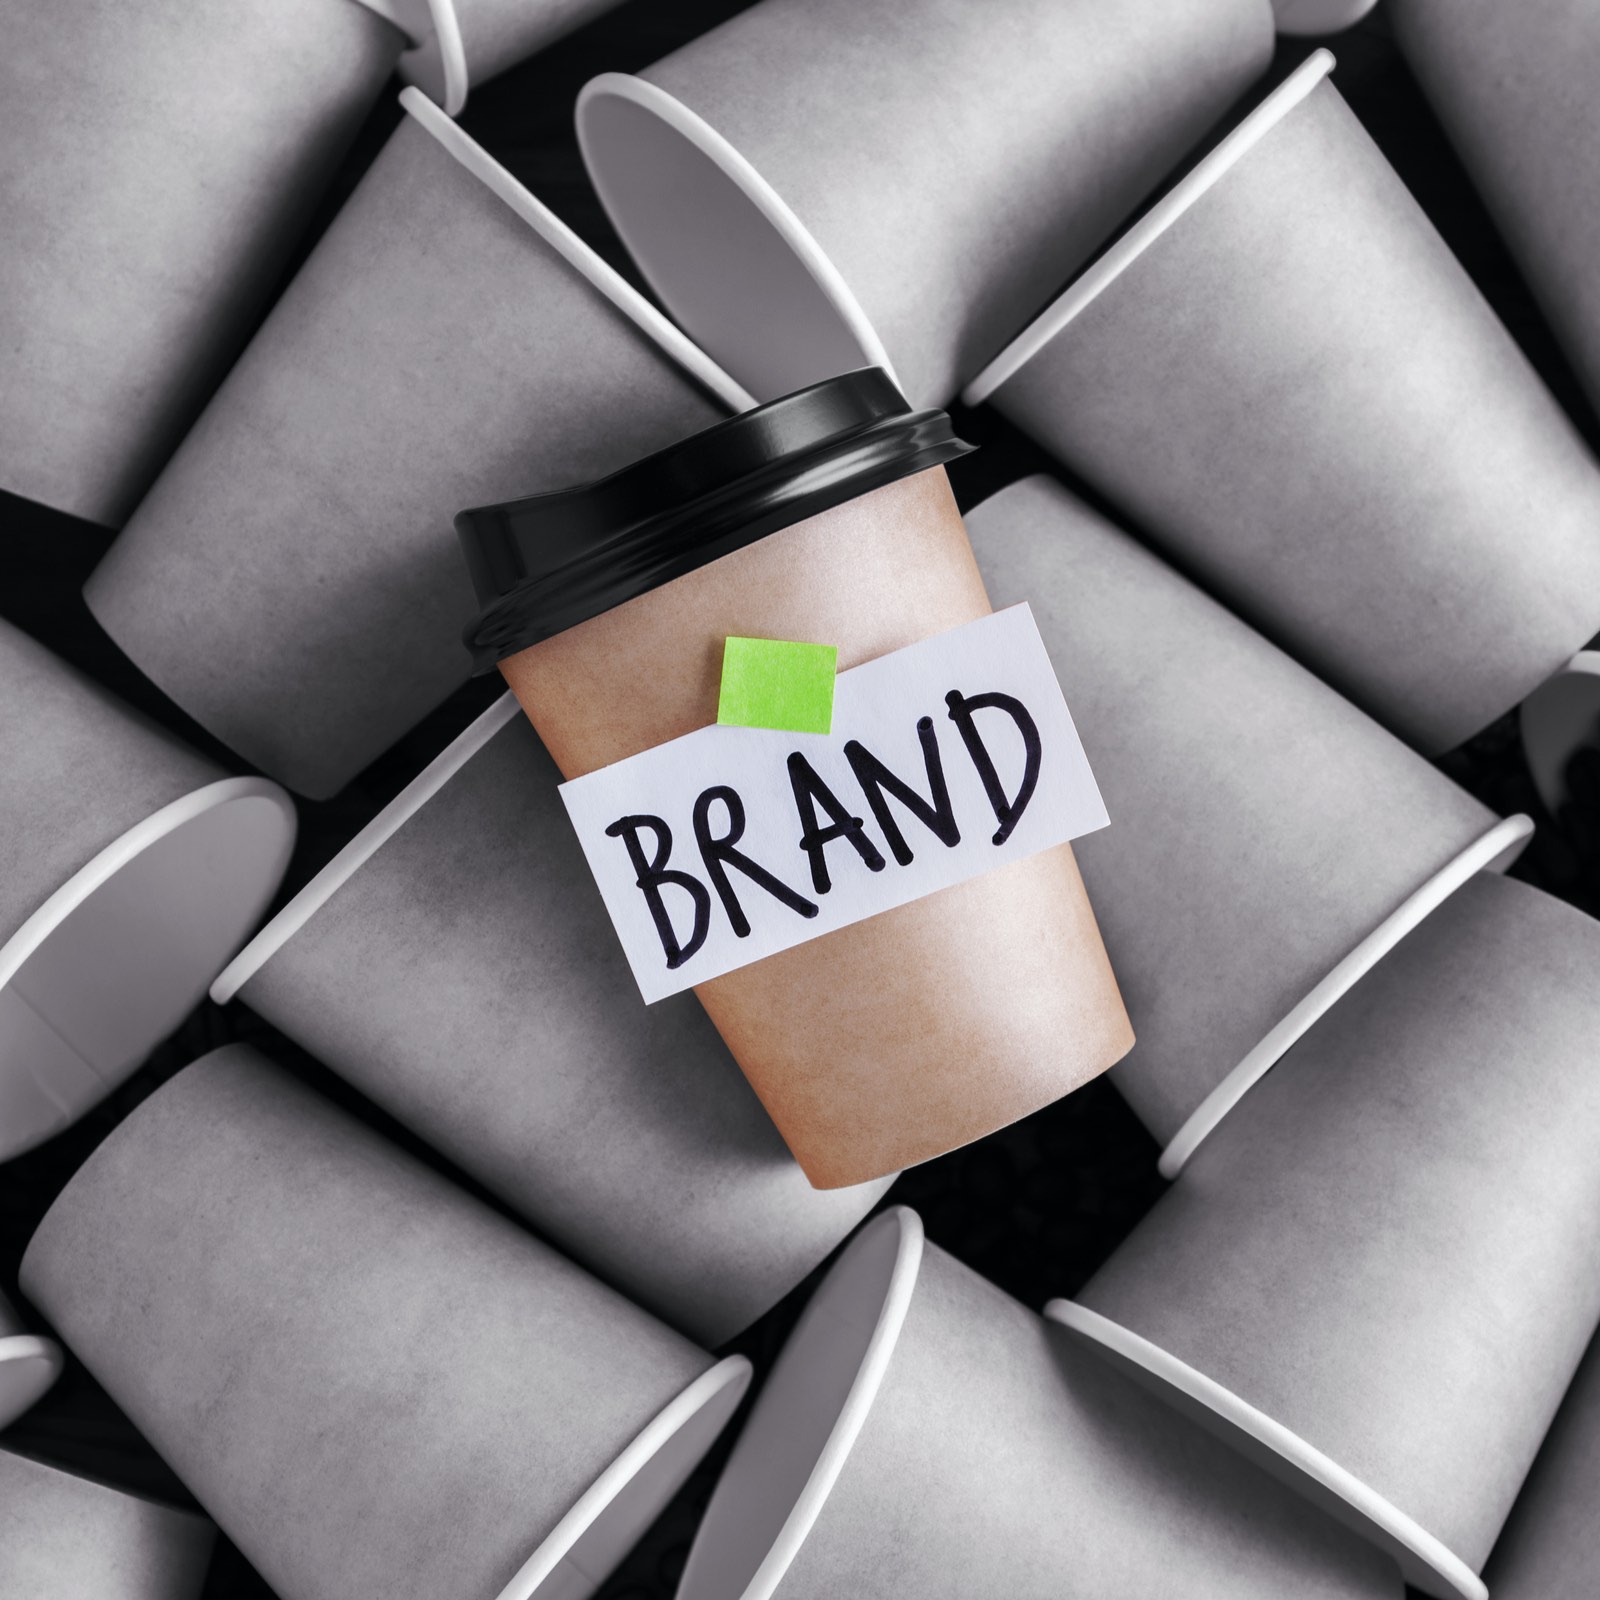 image of a branded coffee cup standing out amongst coffee cups without a brand